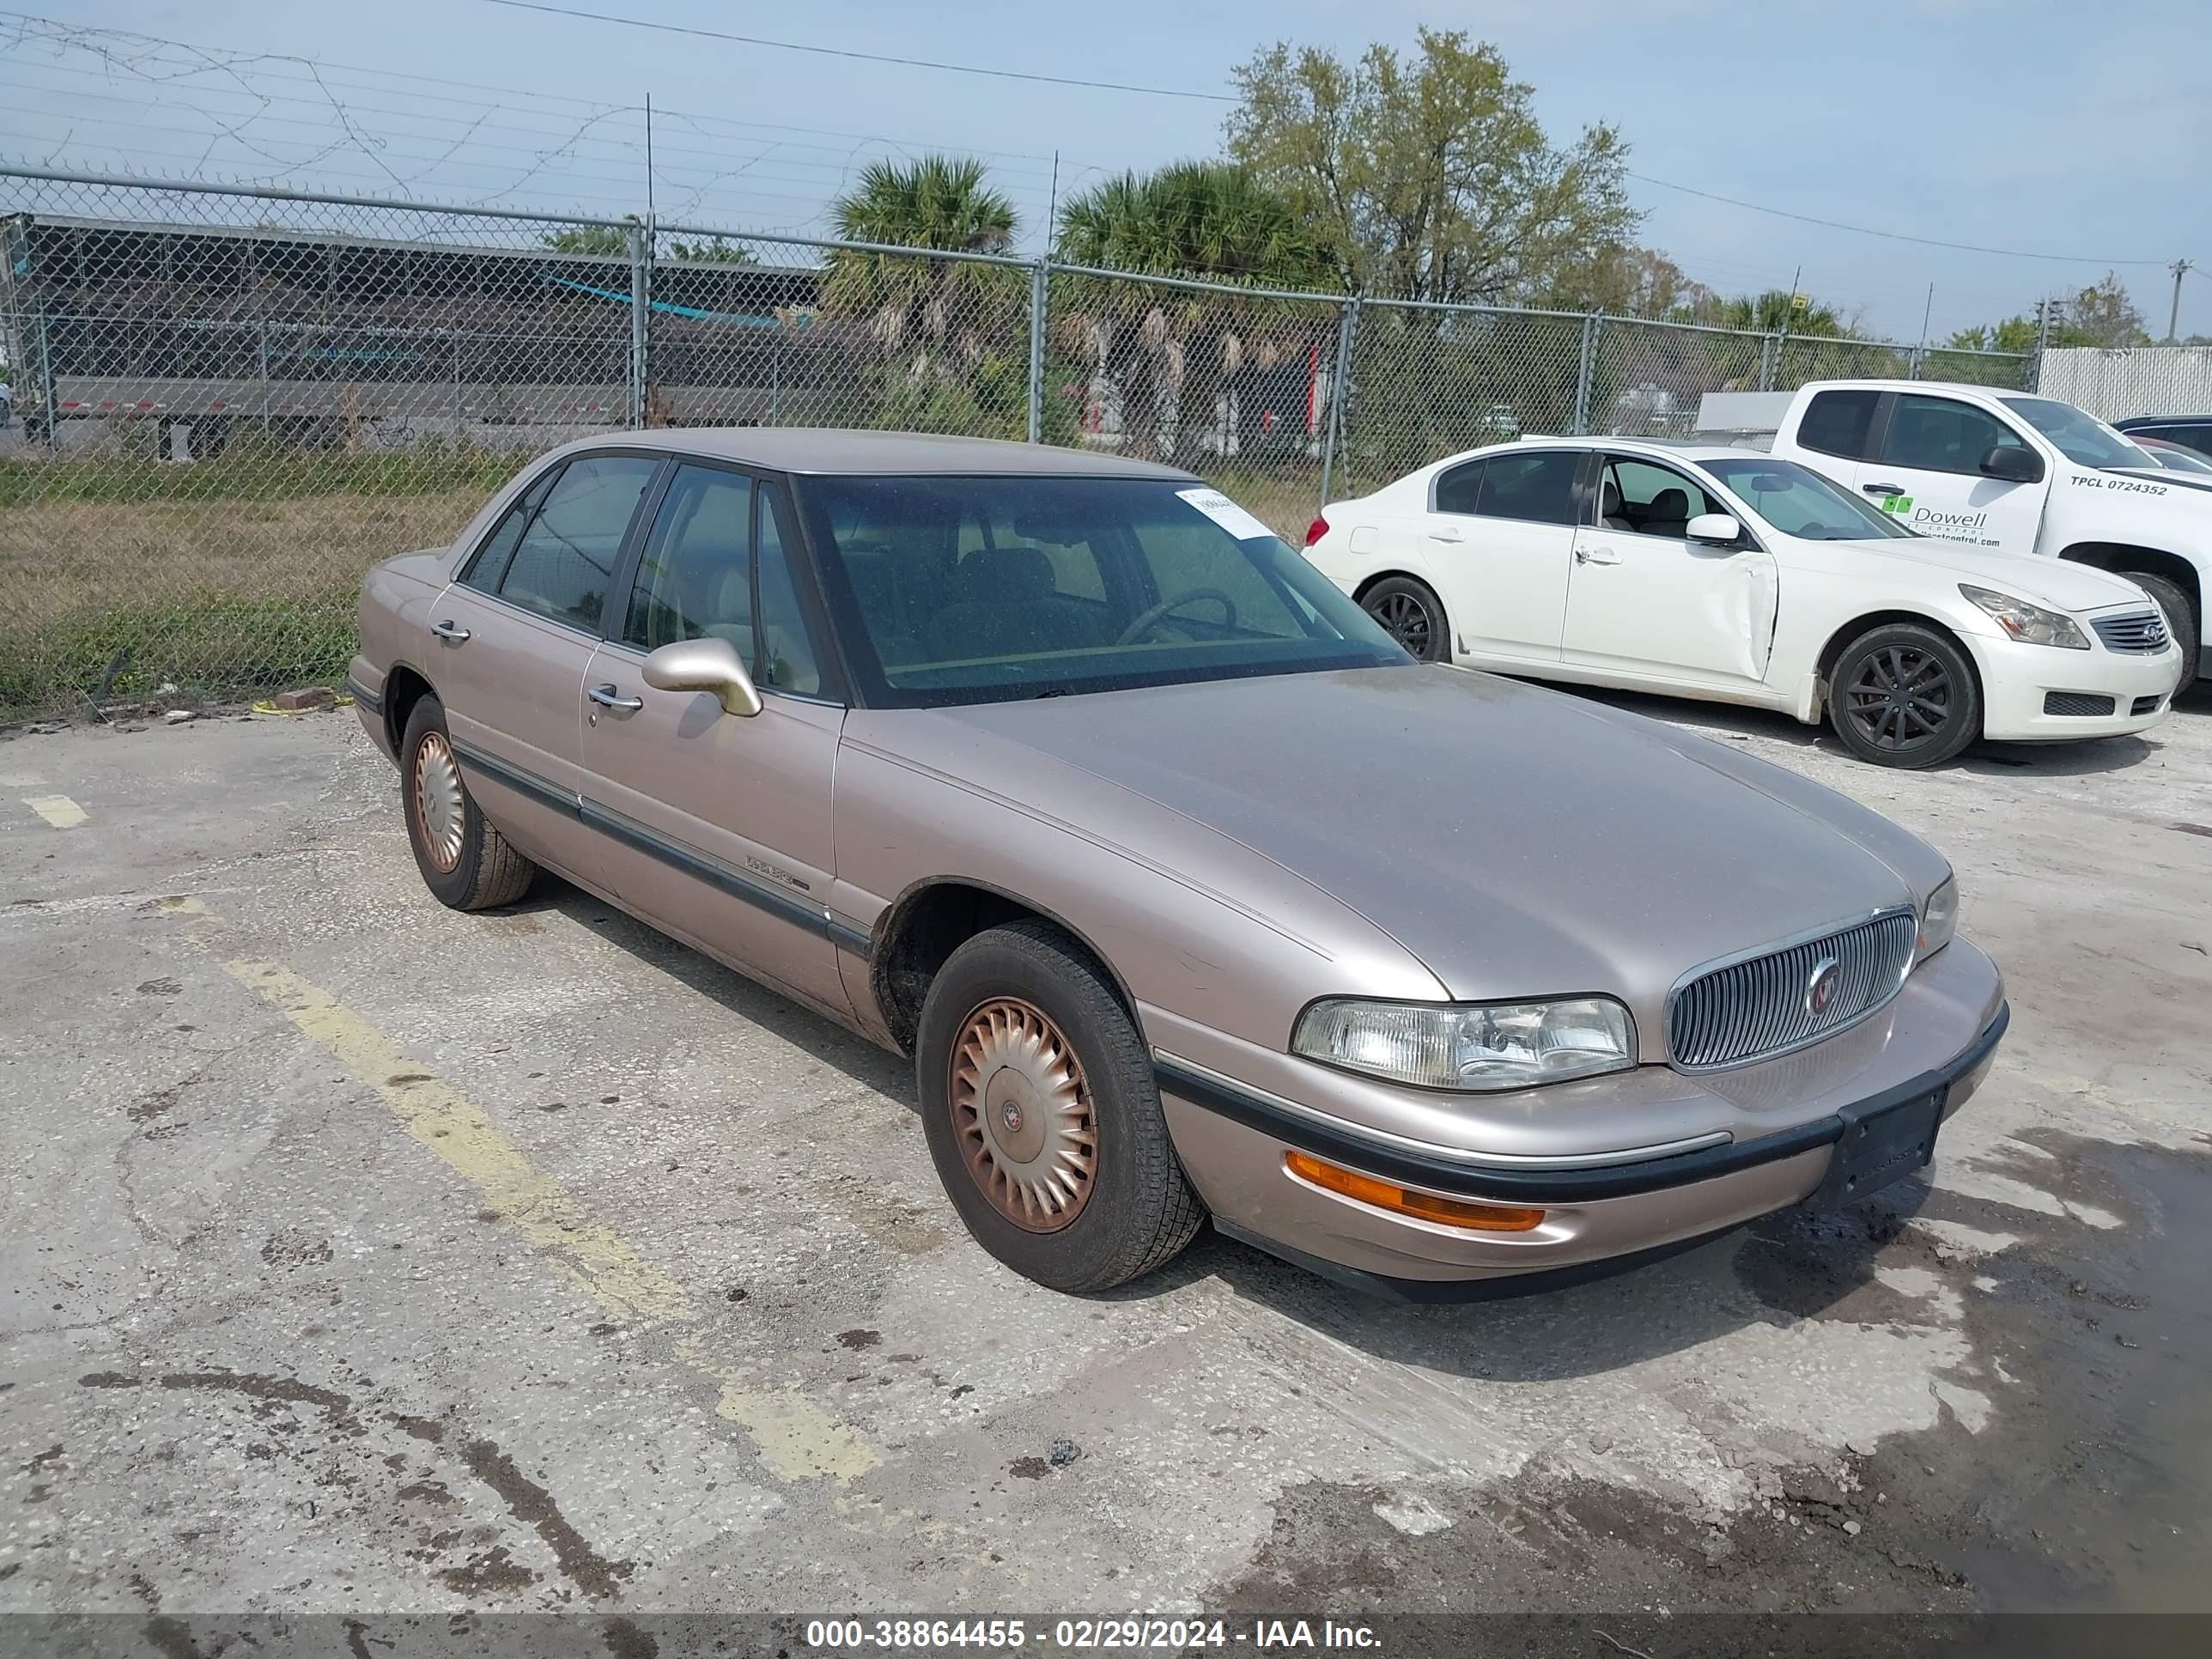 vin: 1G4HP52KXWH495307 1G4HP52KXWH495307 1998 buick lesabre 3800 for Sale in 32824, 151 West Taft Vineland Road, Orlando, USA